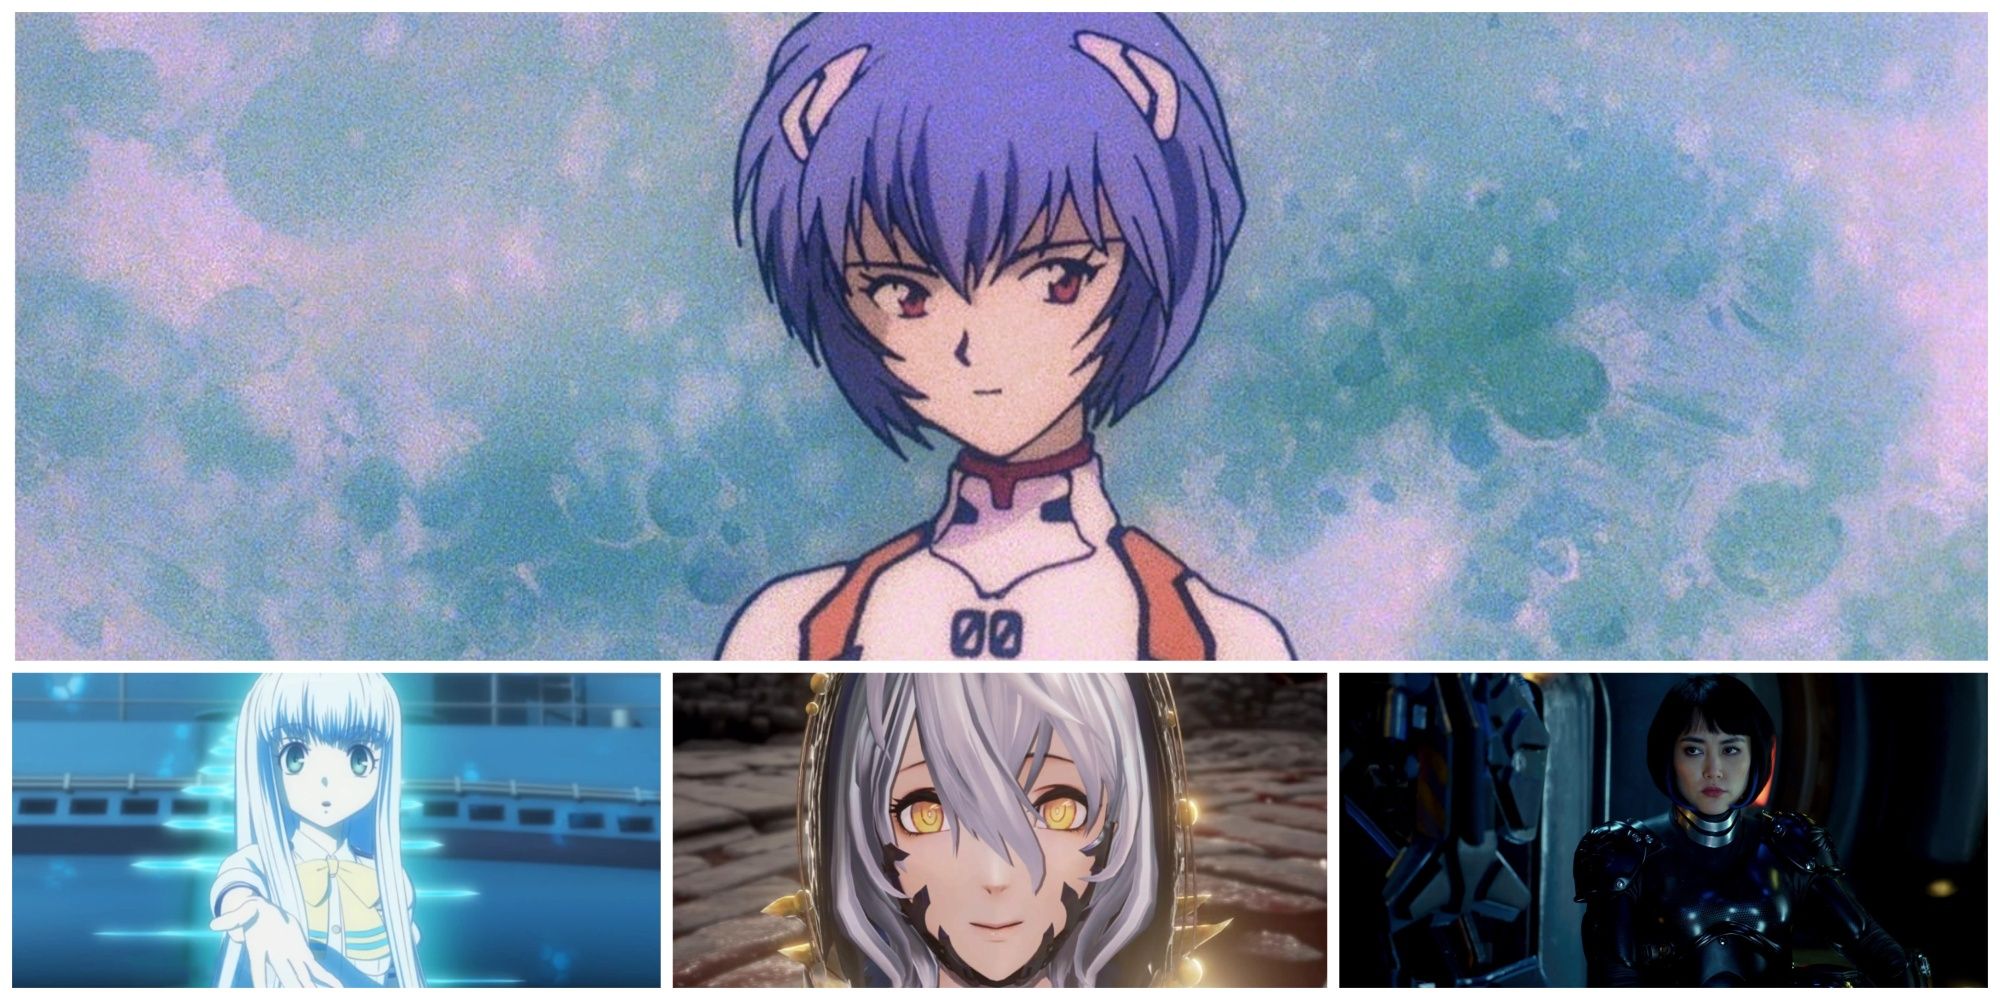 2 old 4 anime?: Cosplay: Rei Ayanami, Evangelion 3.0